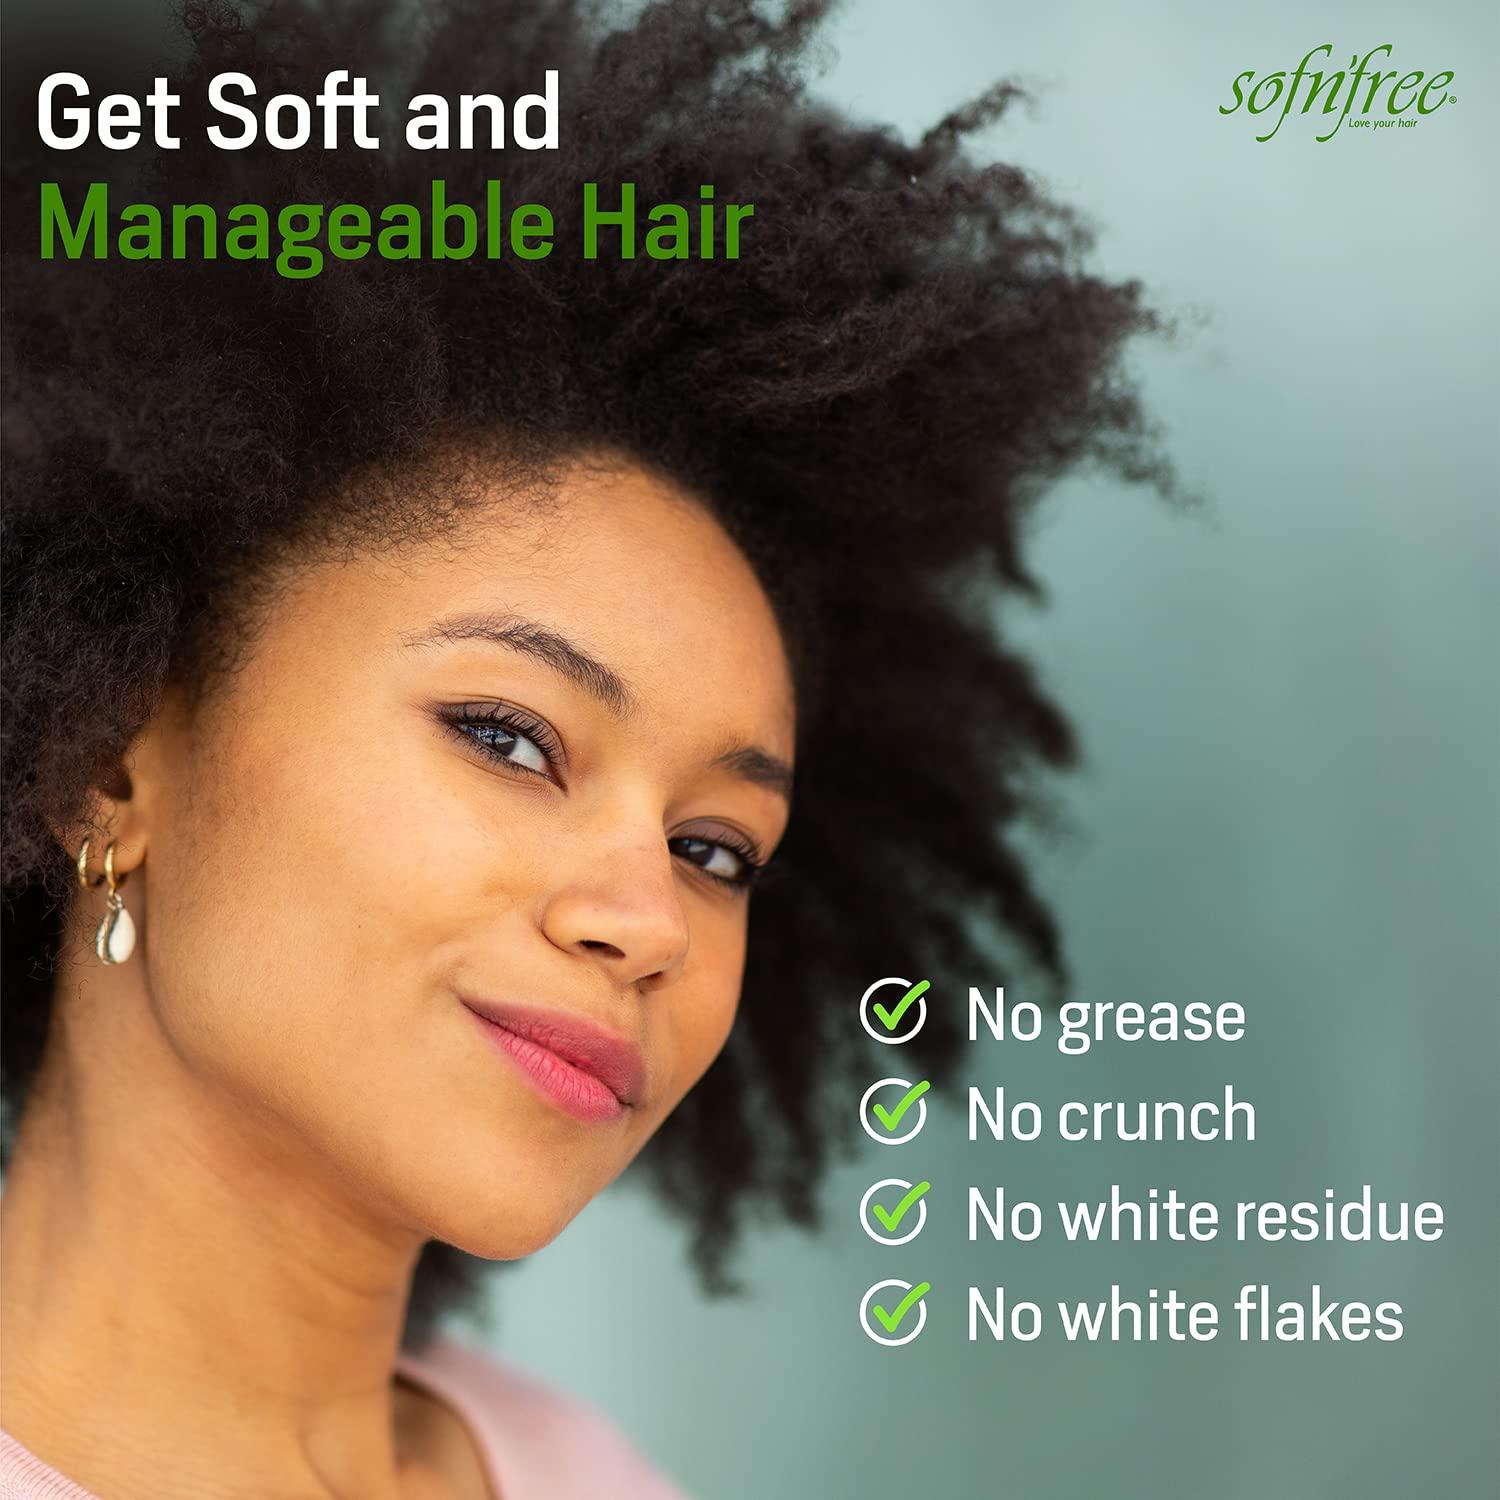 Sofn Free Moisturizer And Curl Activator For Natural Hair Soft Curls And Waves 3381 Fl Oz 